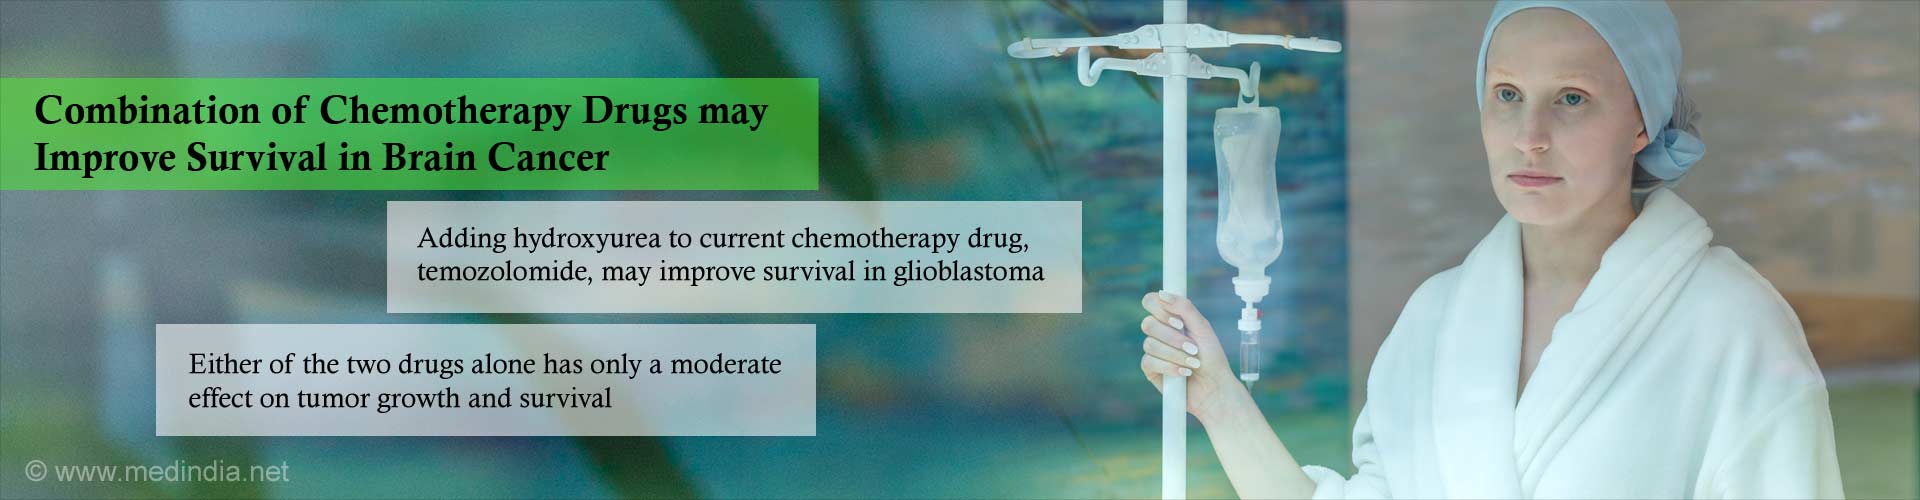 combination of chemotherapy drugs may improve survival in brain cancer
- adding hydrooyurea to current chemotherapy drug, temozolomide, may improve survival in glioblastoma
- either of the two drugs alone has only a moderate effect on tumor growth and survival
